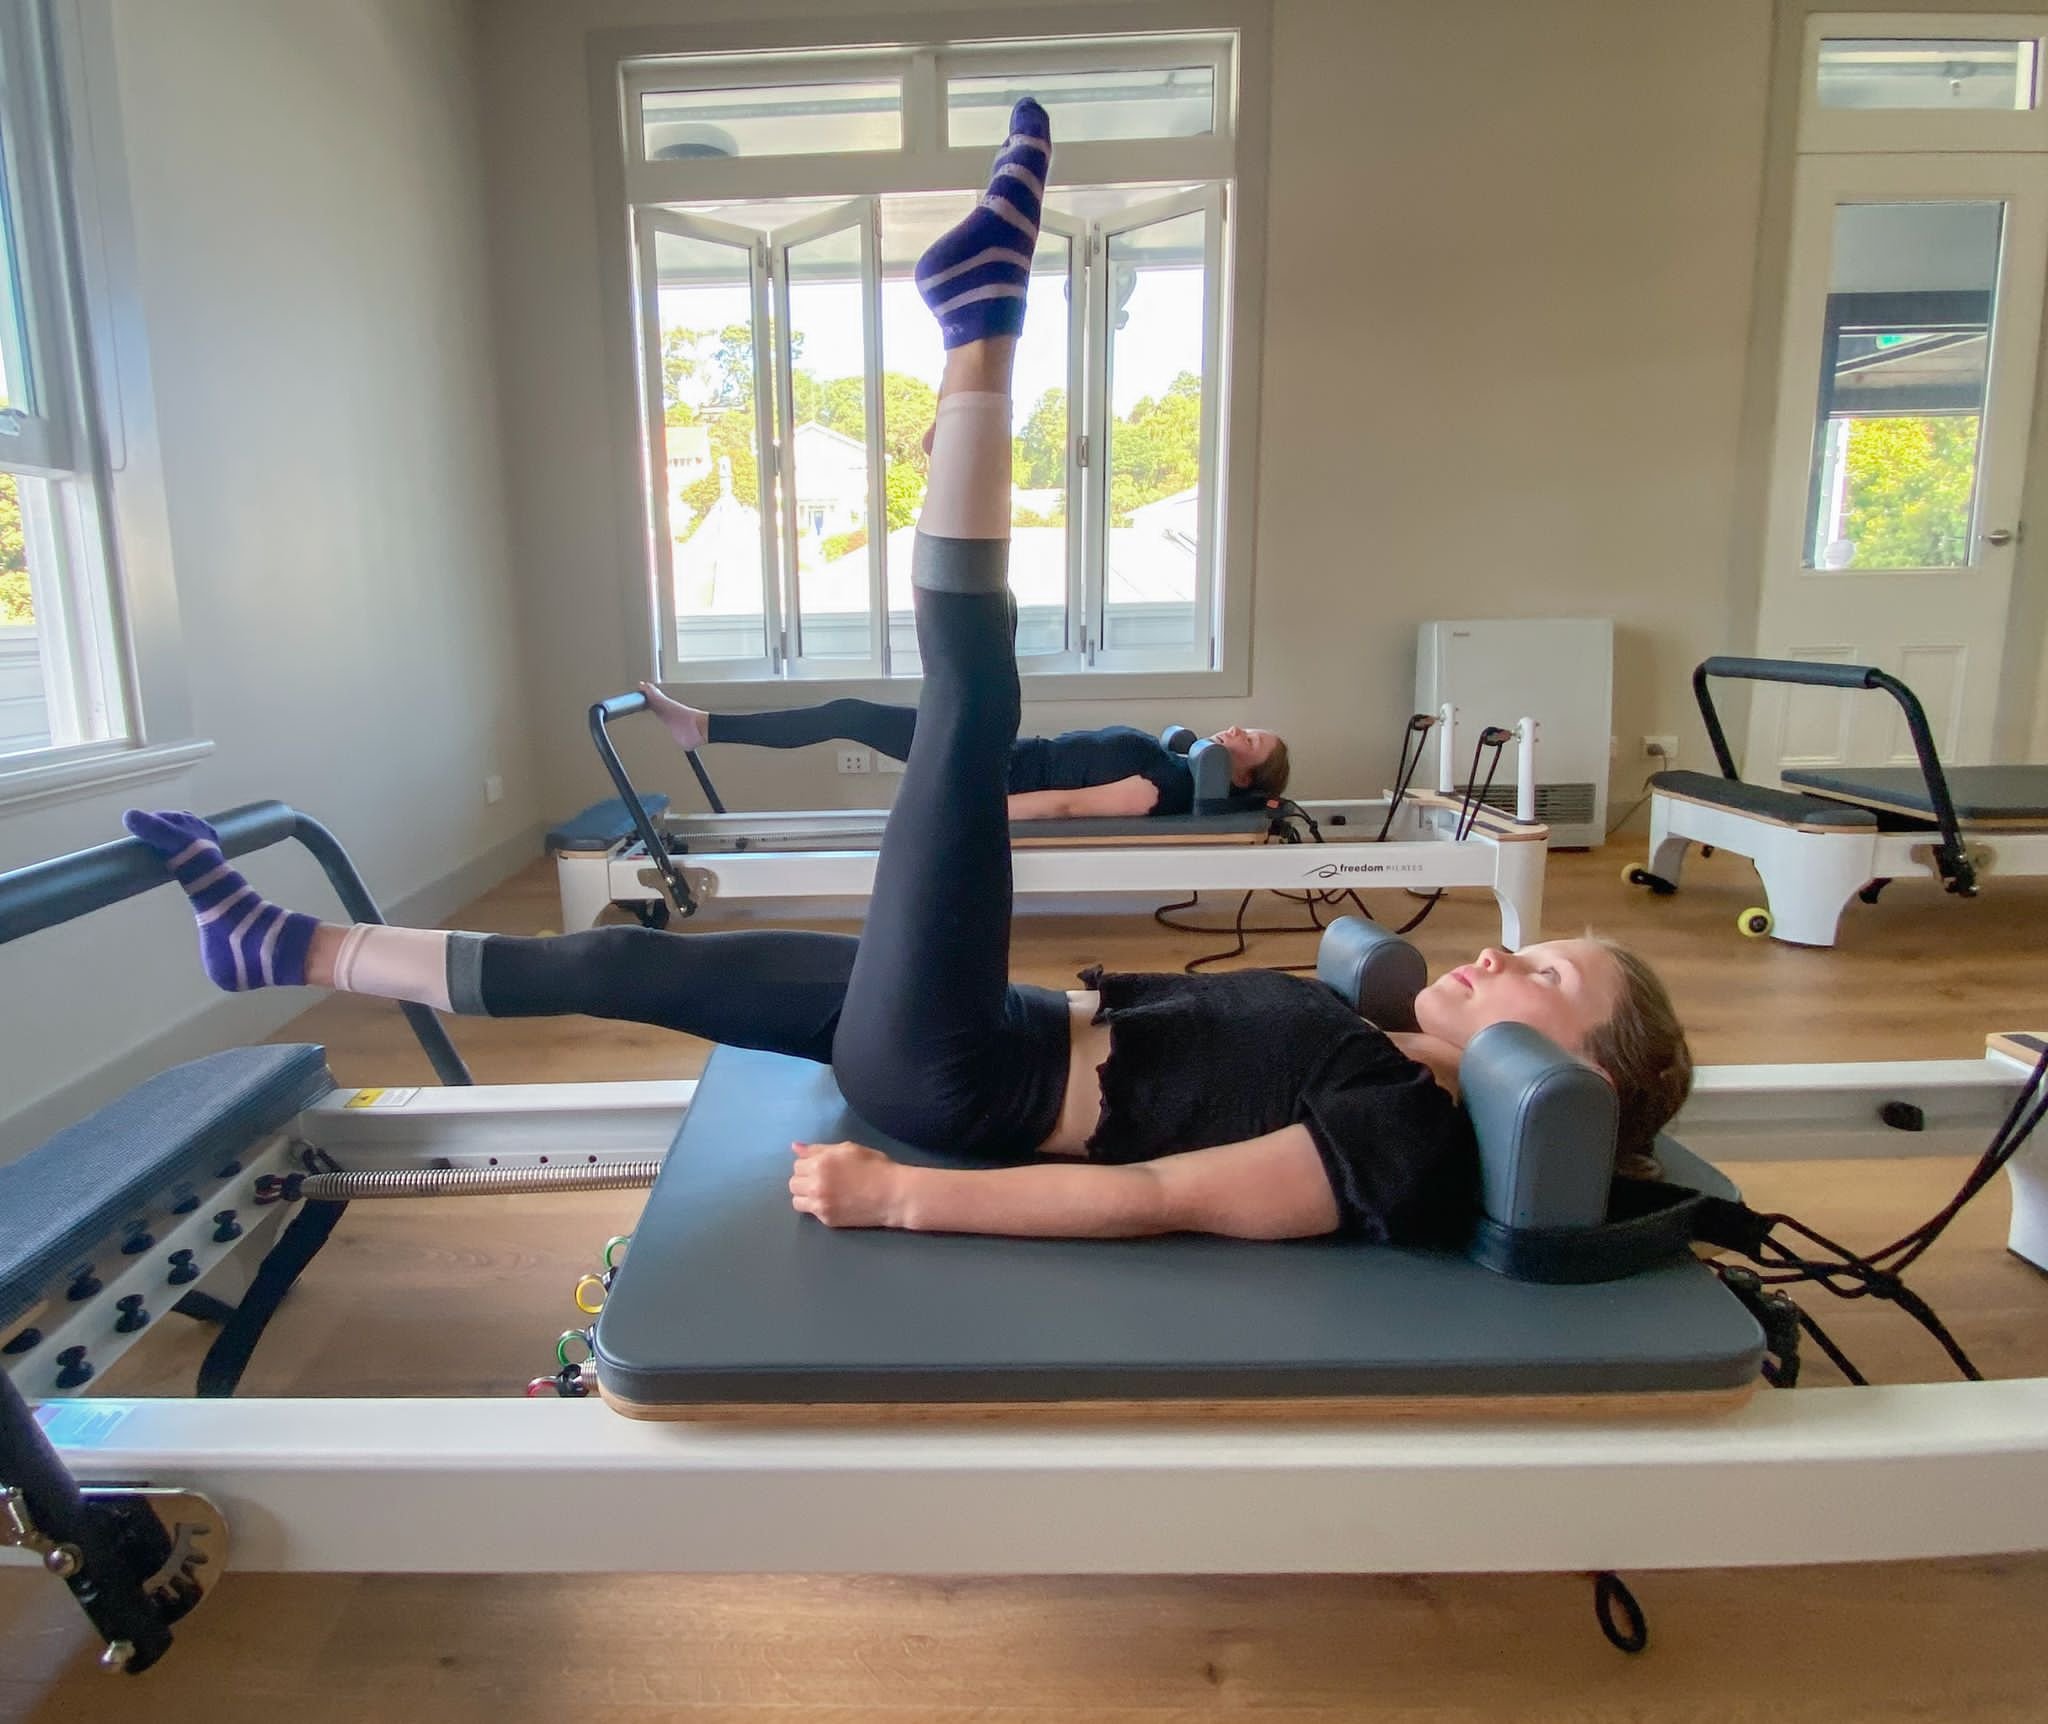 Club Pilates Boulder reformer class could be key in alleviating back pain –  Boulder Daily Camera